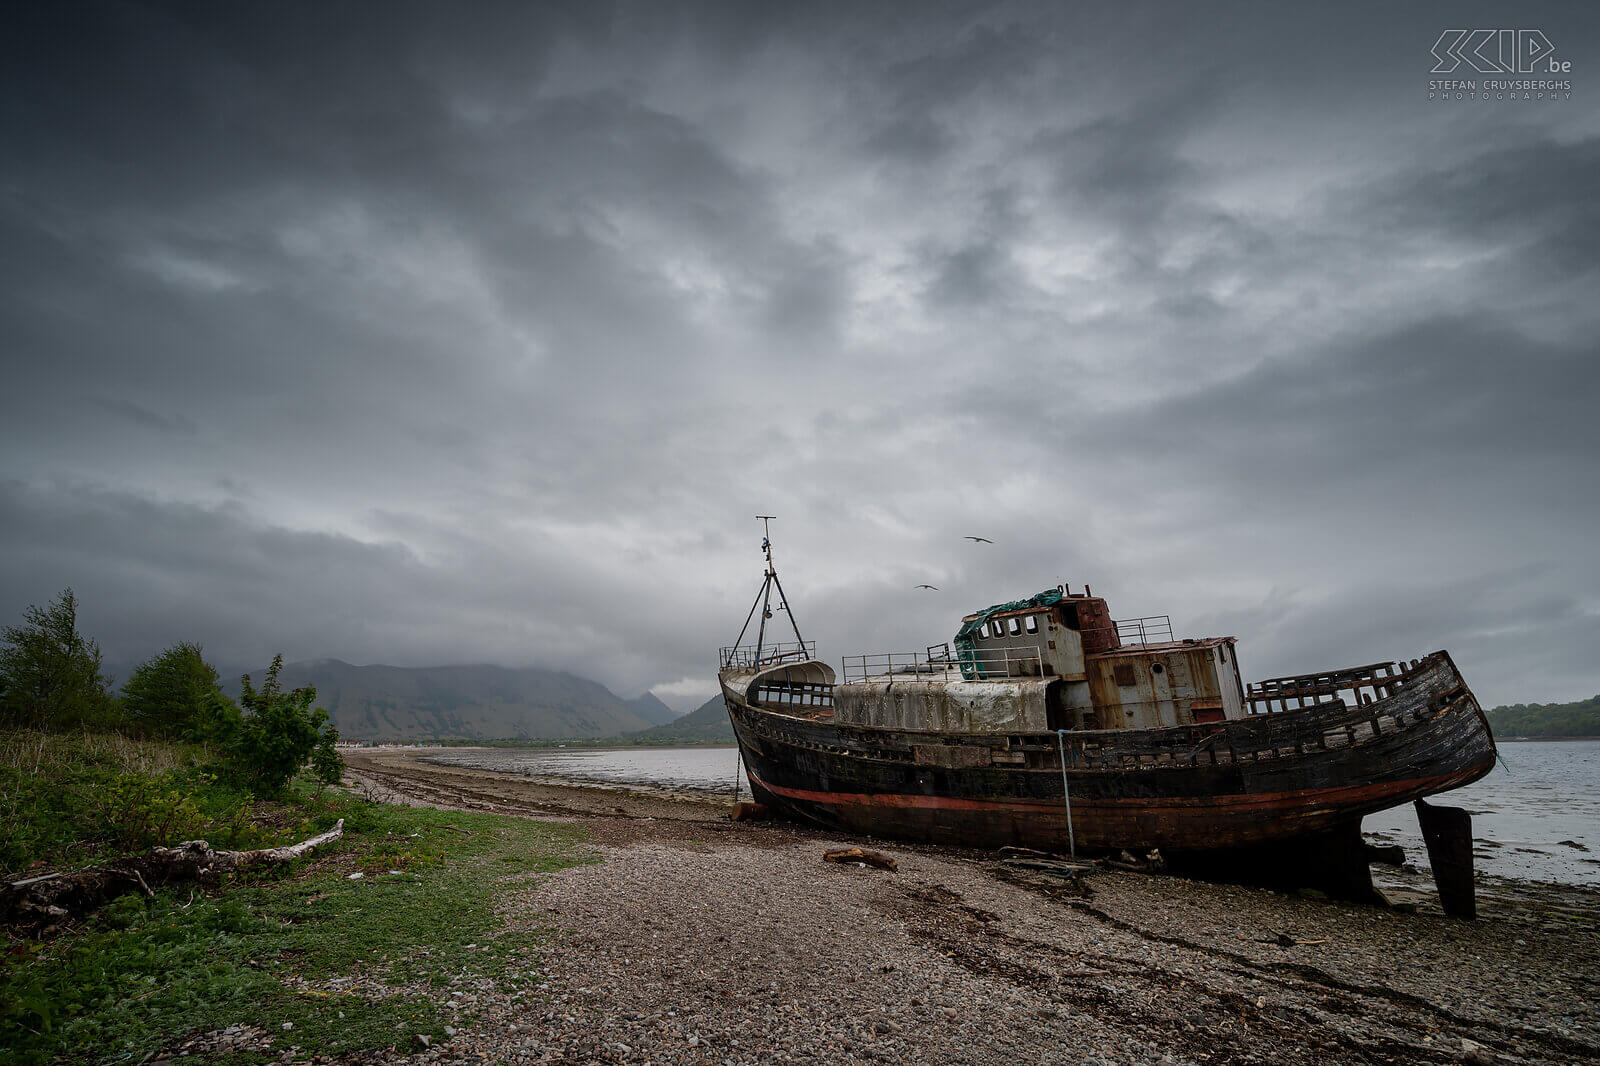 Corpach - Old Boat of Caol The Old Boat of Caol, also known as the Corpach Wreck, is a fishing boat stranded on the coast where the inlets of Loch Linnhe and Loch Eil meet at Fort William. Stefan Cruysberghs